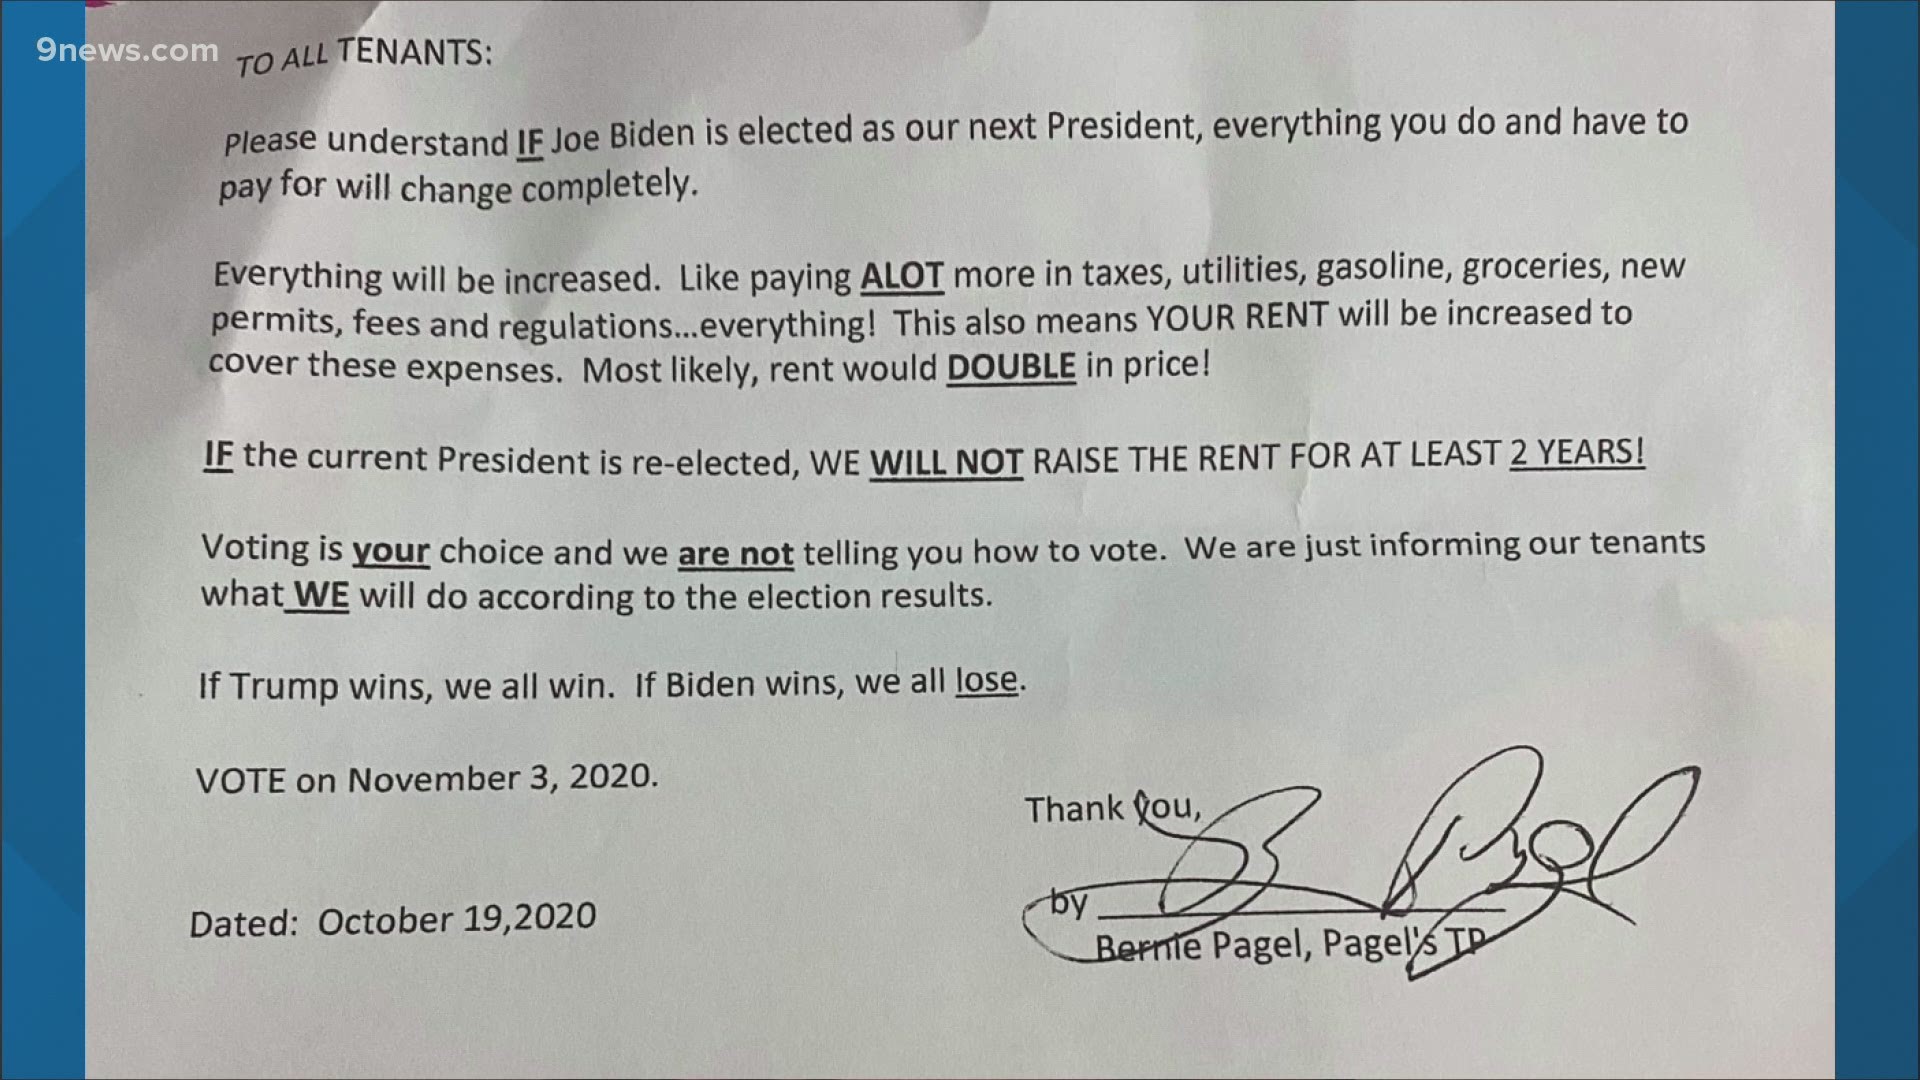 The landlord of a trailer park in Fort Morgan allegedly sent a note to residents warning rent would most likely double in price if Joe Biden becomes President.